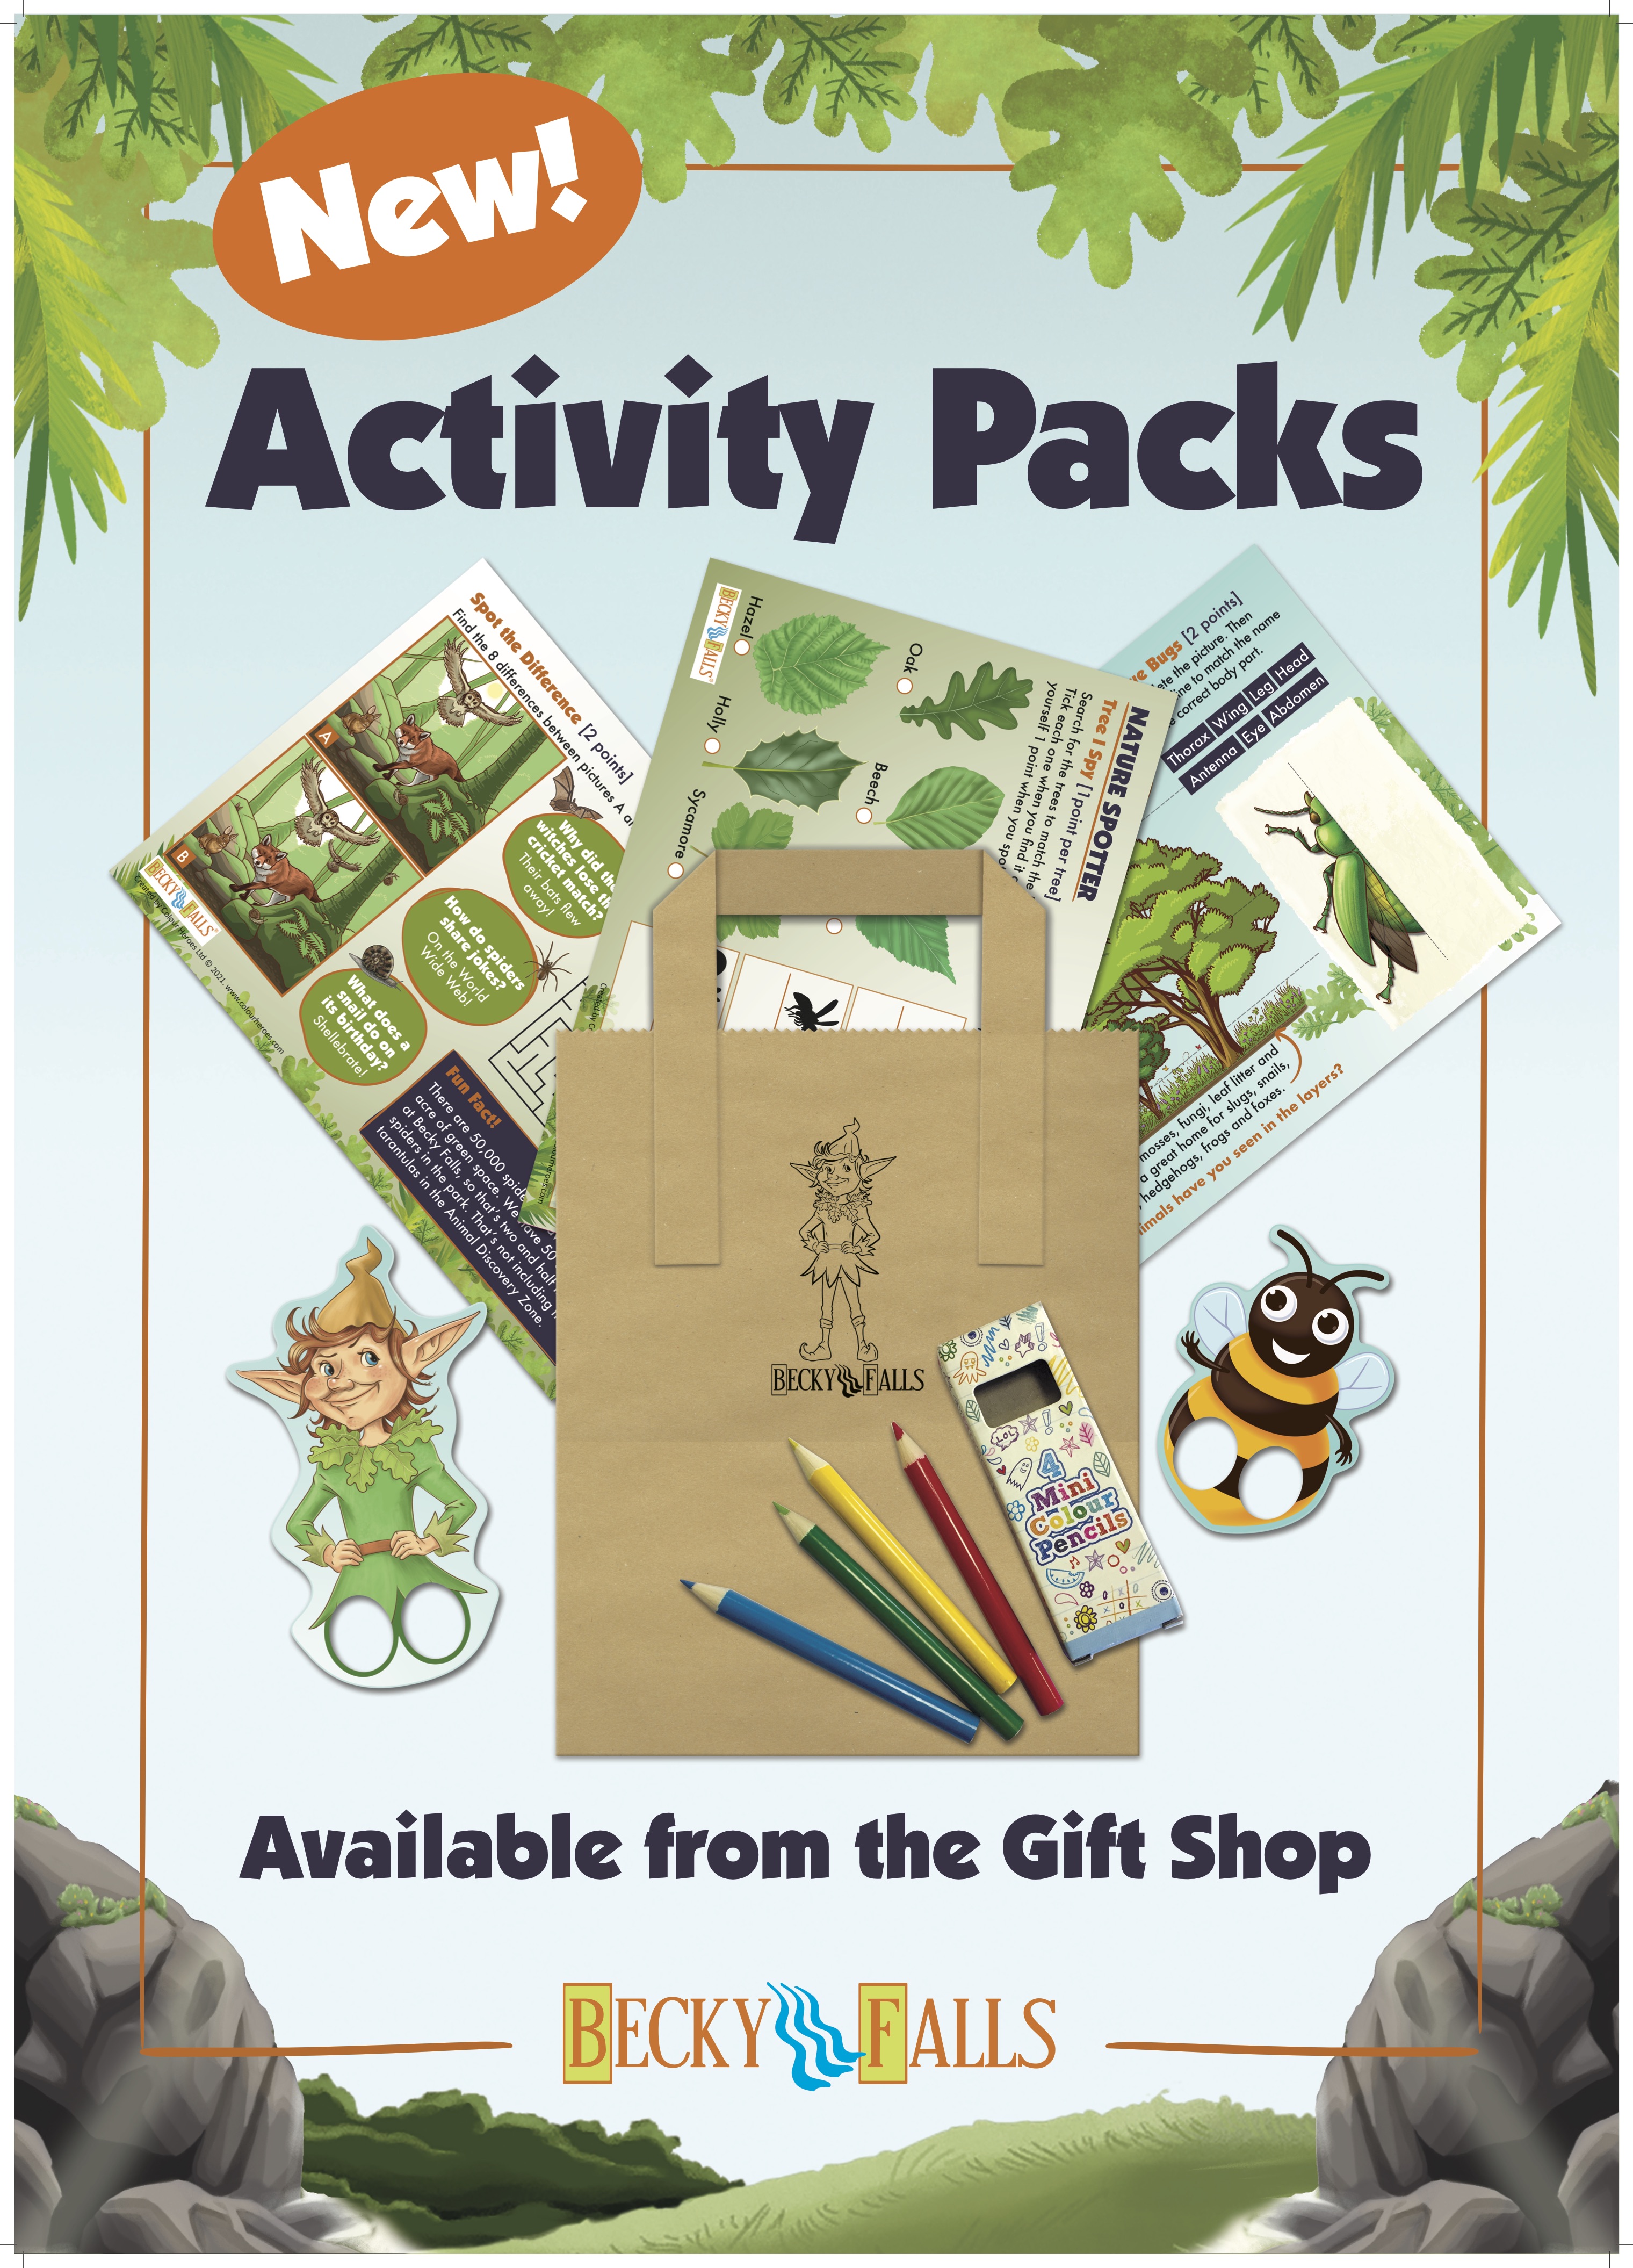 Activity Pack sign